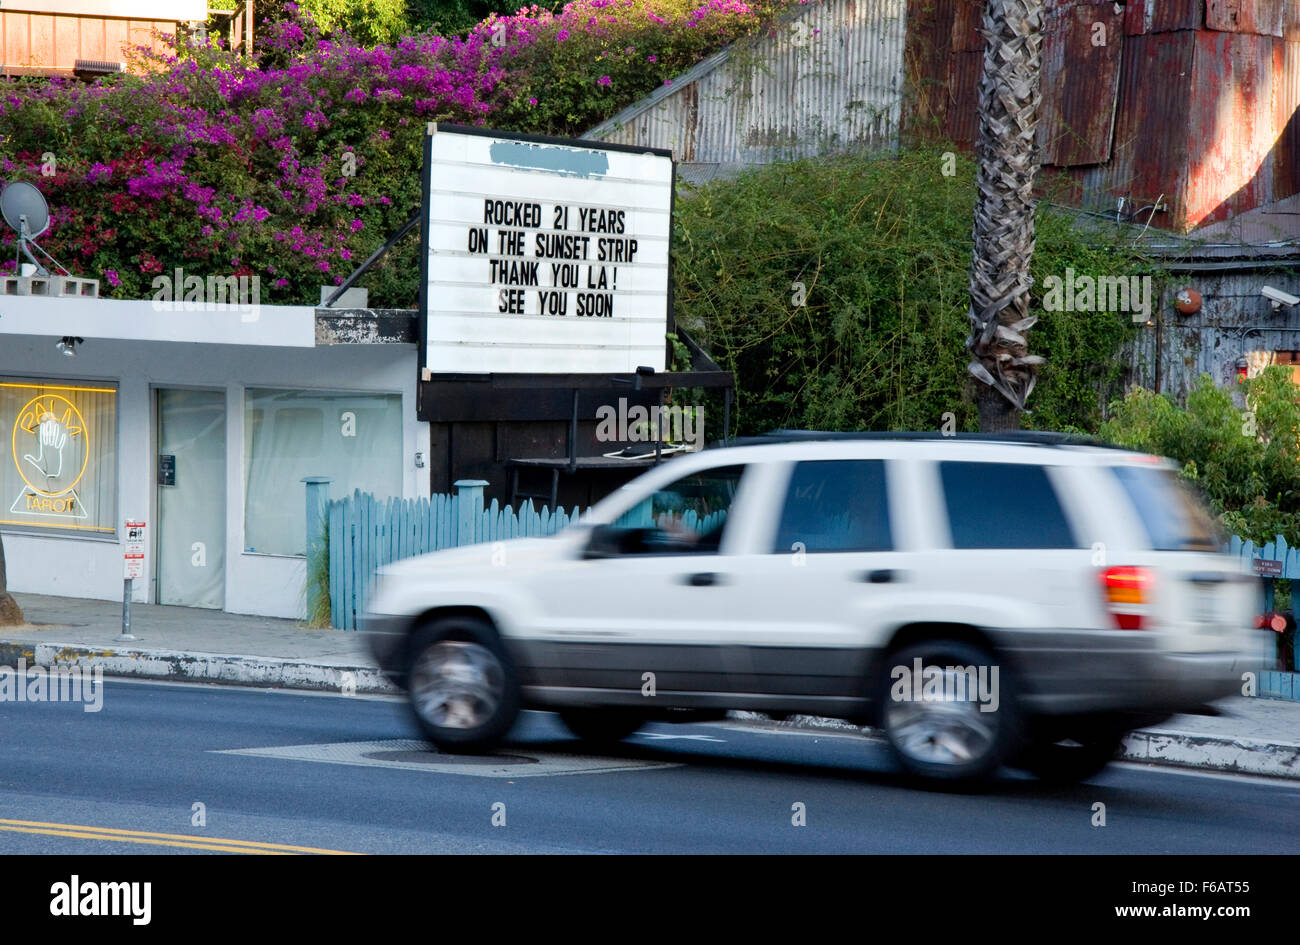 The House of Blues on the Sunset Strip closes after 21 years. Stock Photo